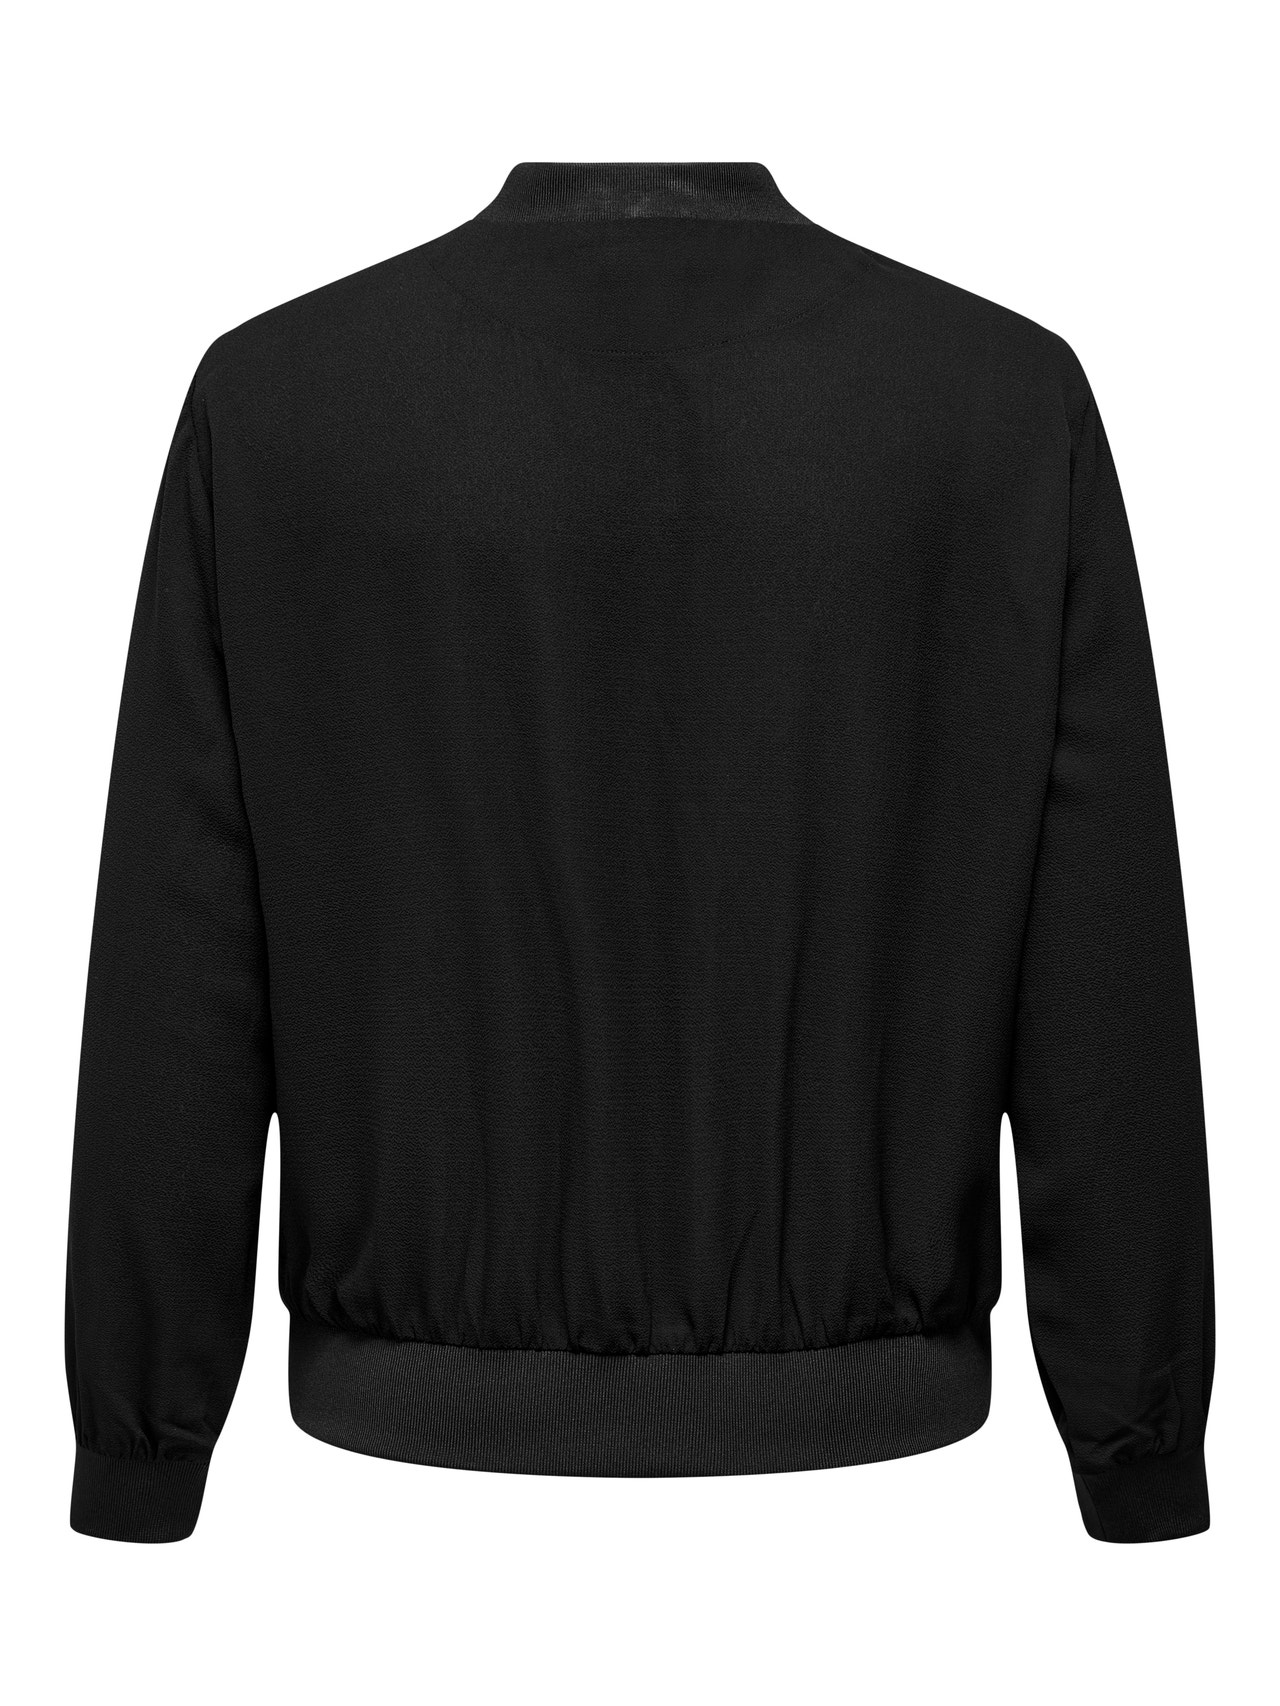 ONLY Bombers anti-froid Col italien Poignets côtelés -Black - 15250912